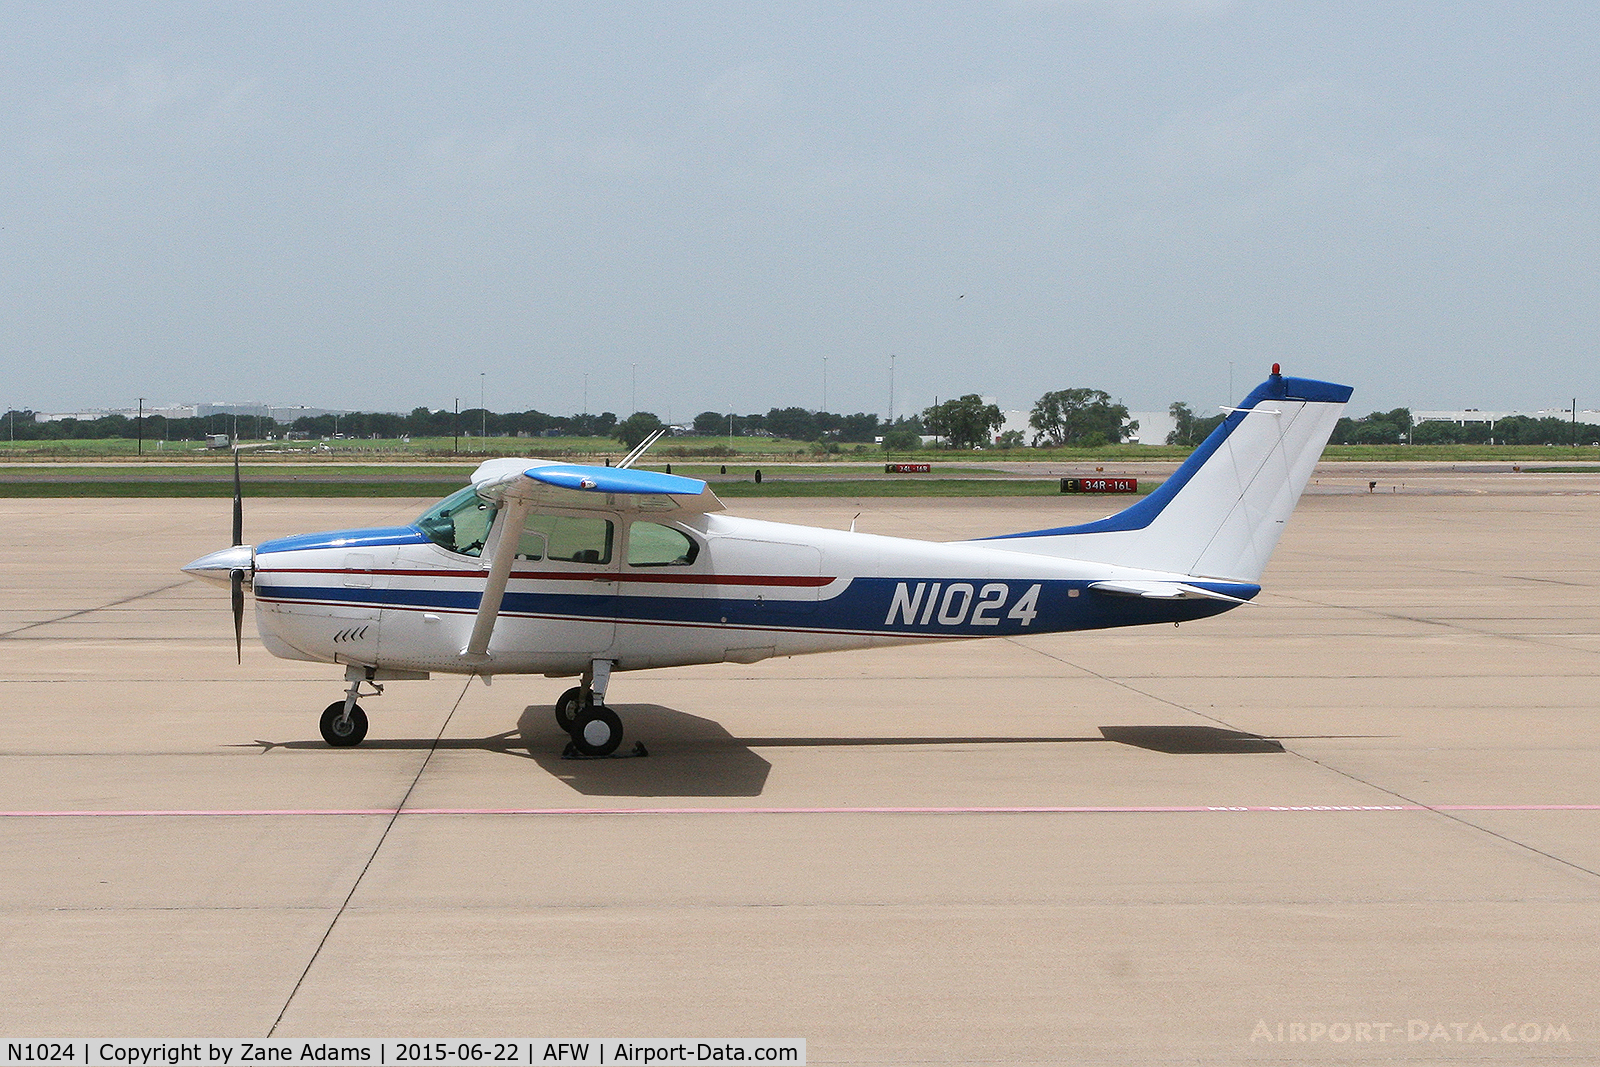 N1024, 1960 Cessna 210 C/N 57425, At Alliance Airport - Fort Worth, TX